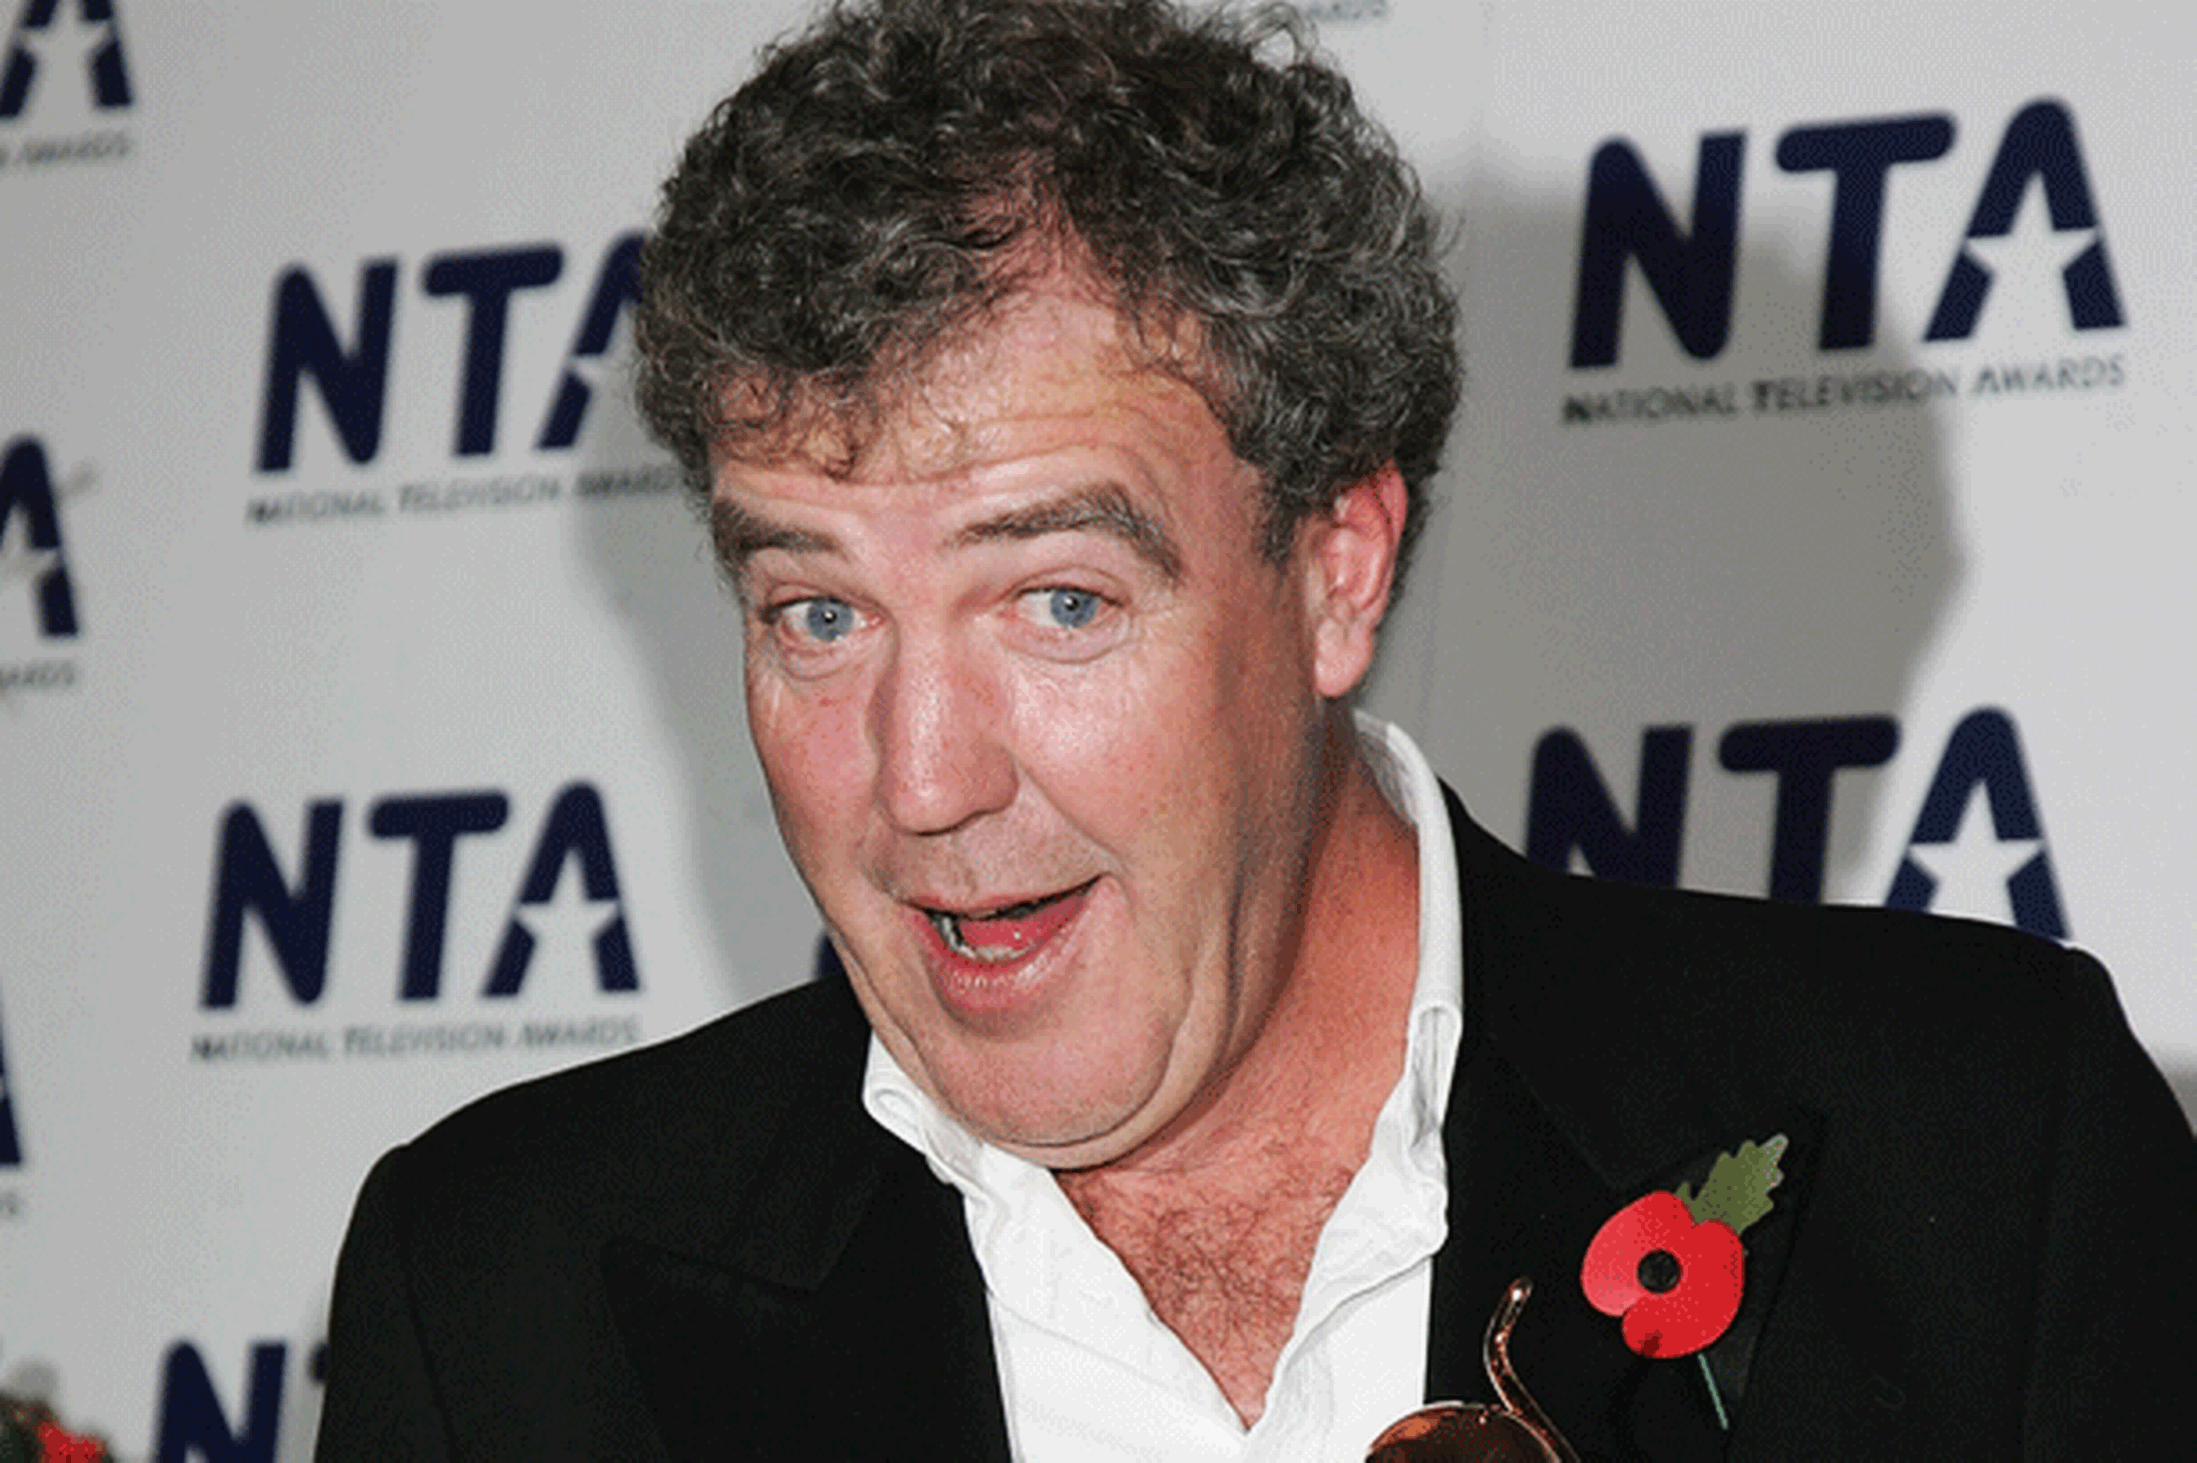 JEREMY CLARKSON ���Not Bigger than BBC,��� Says Network Boss, Could Be.